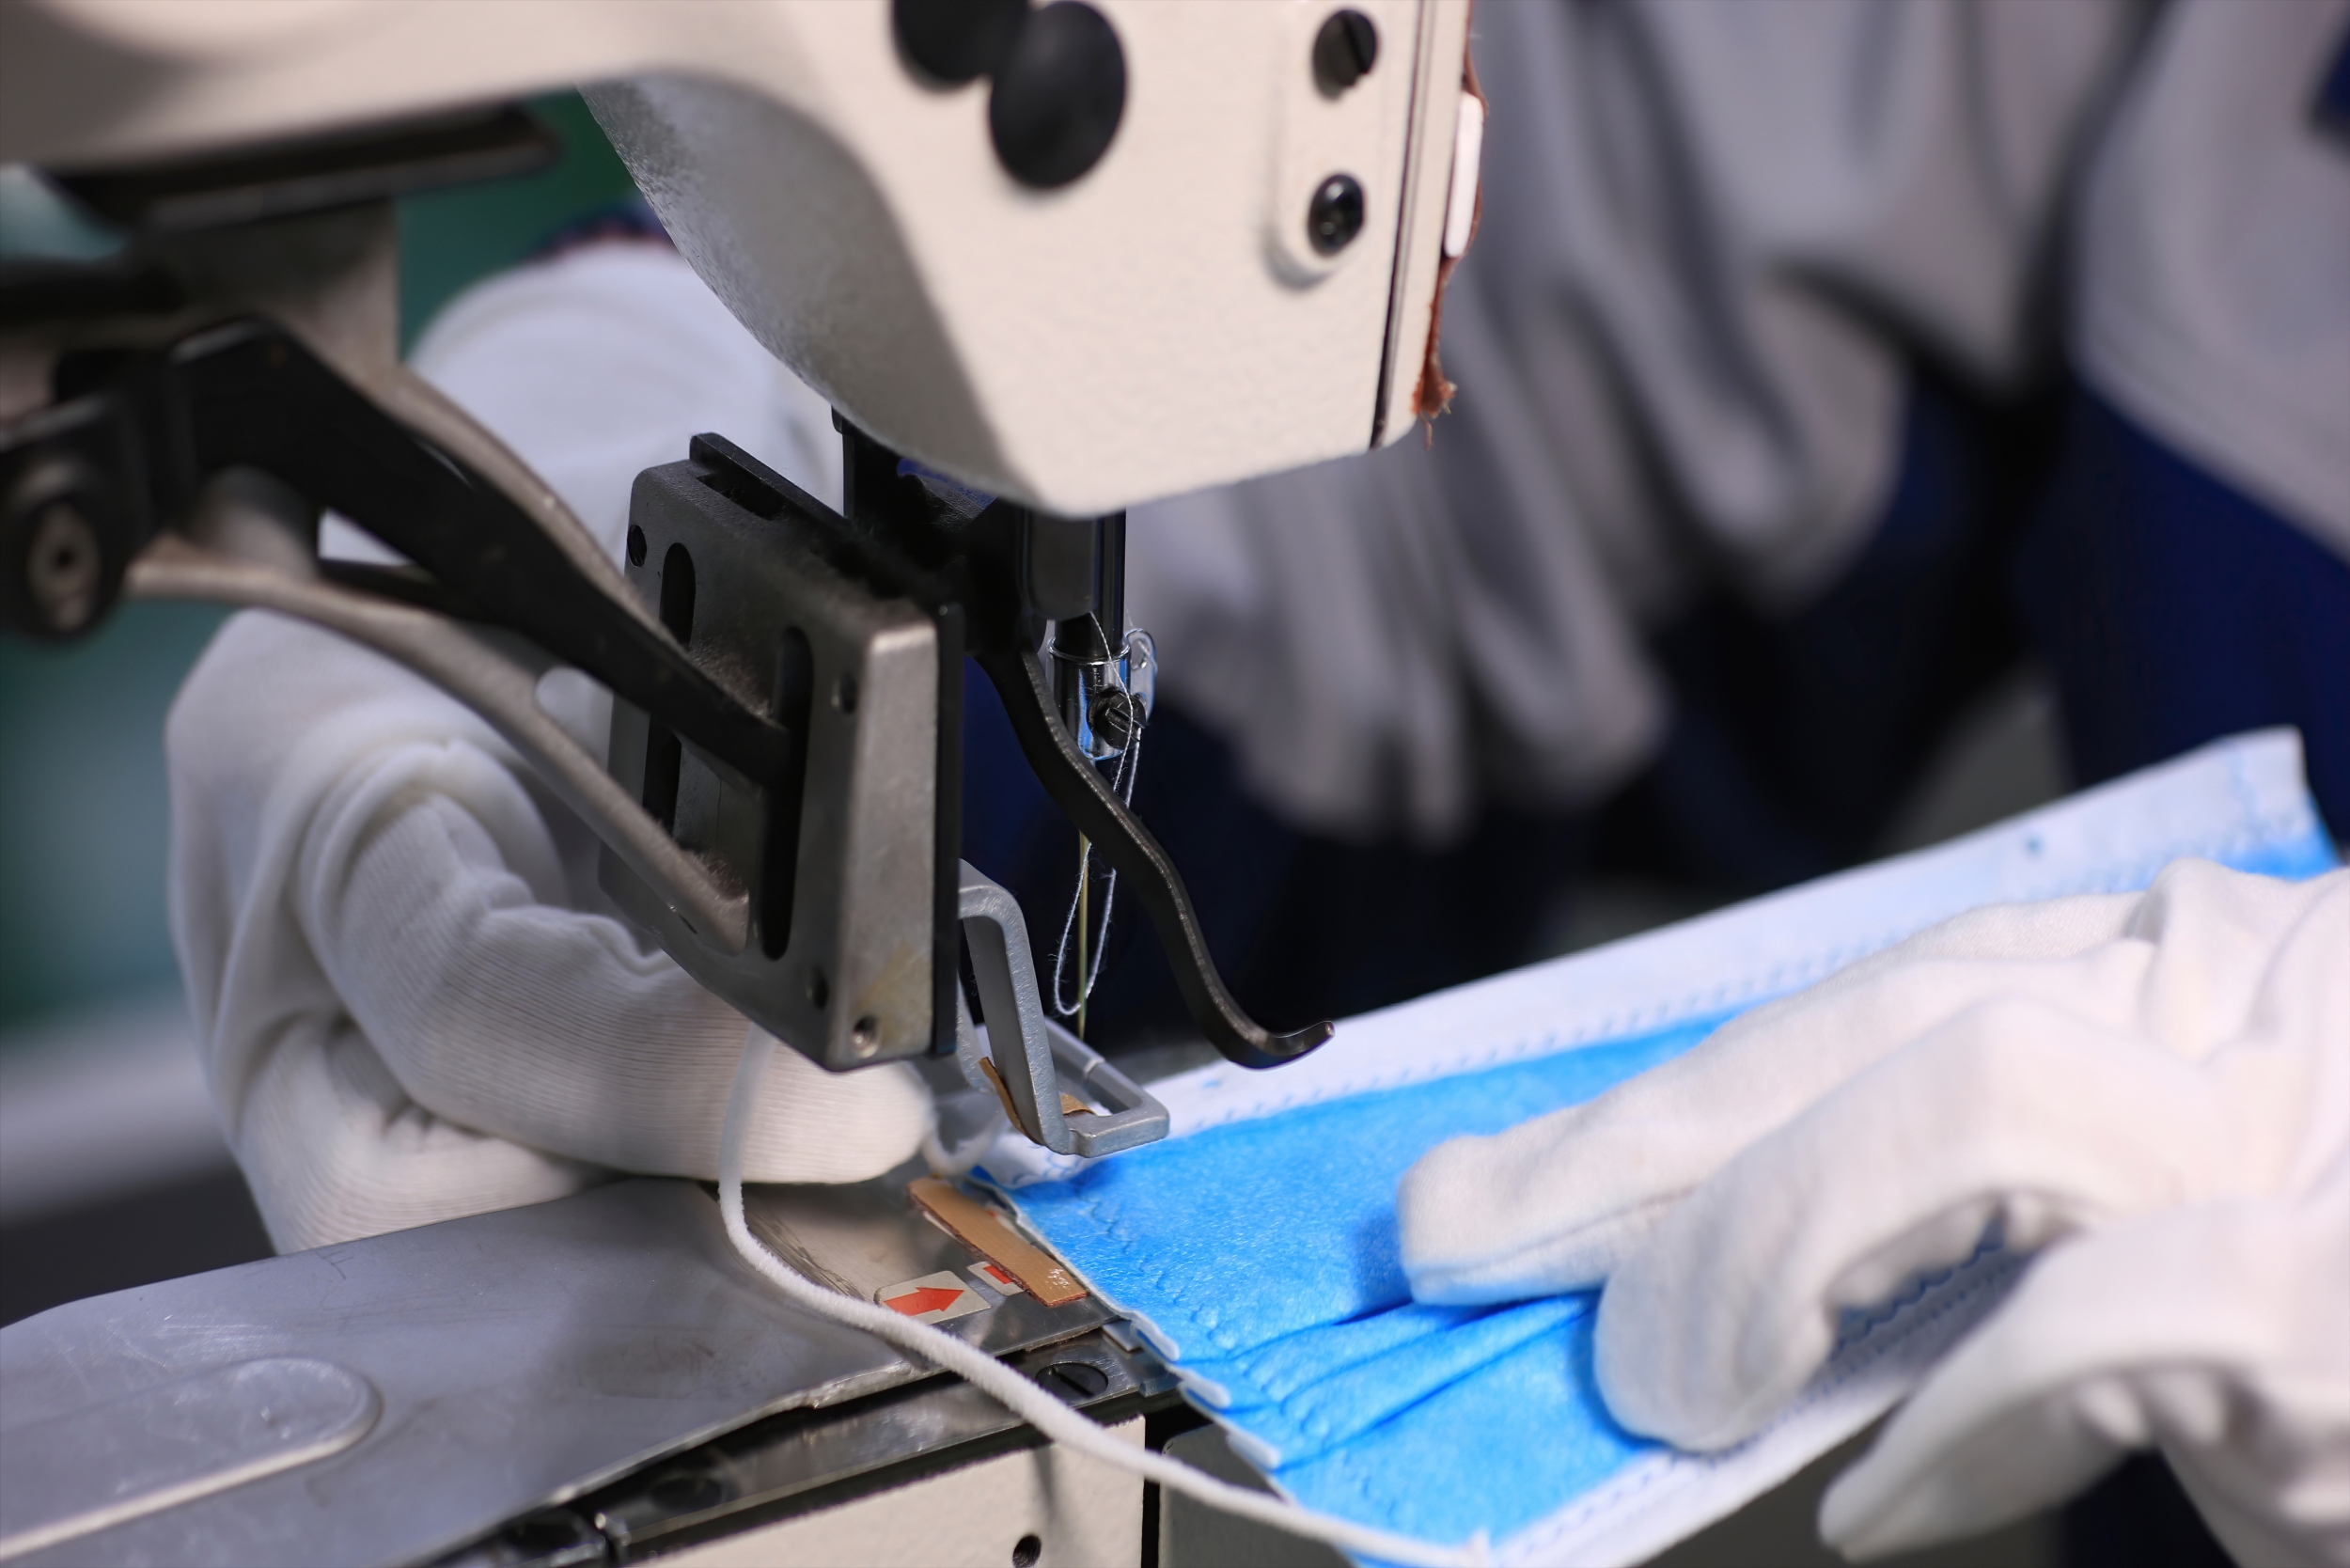 An image of a person (only their hands are shown) using a sewing machine to sew a blue surgical mask.